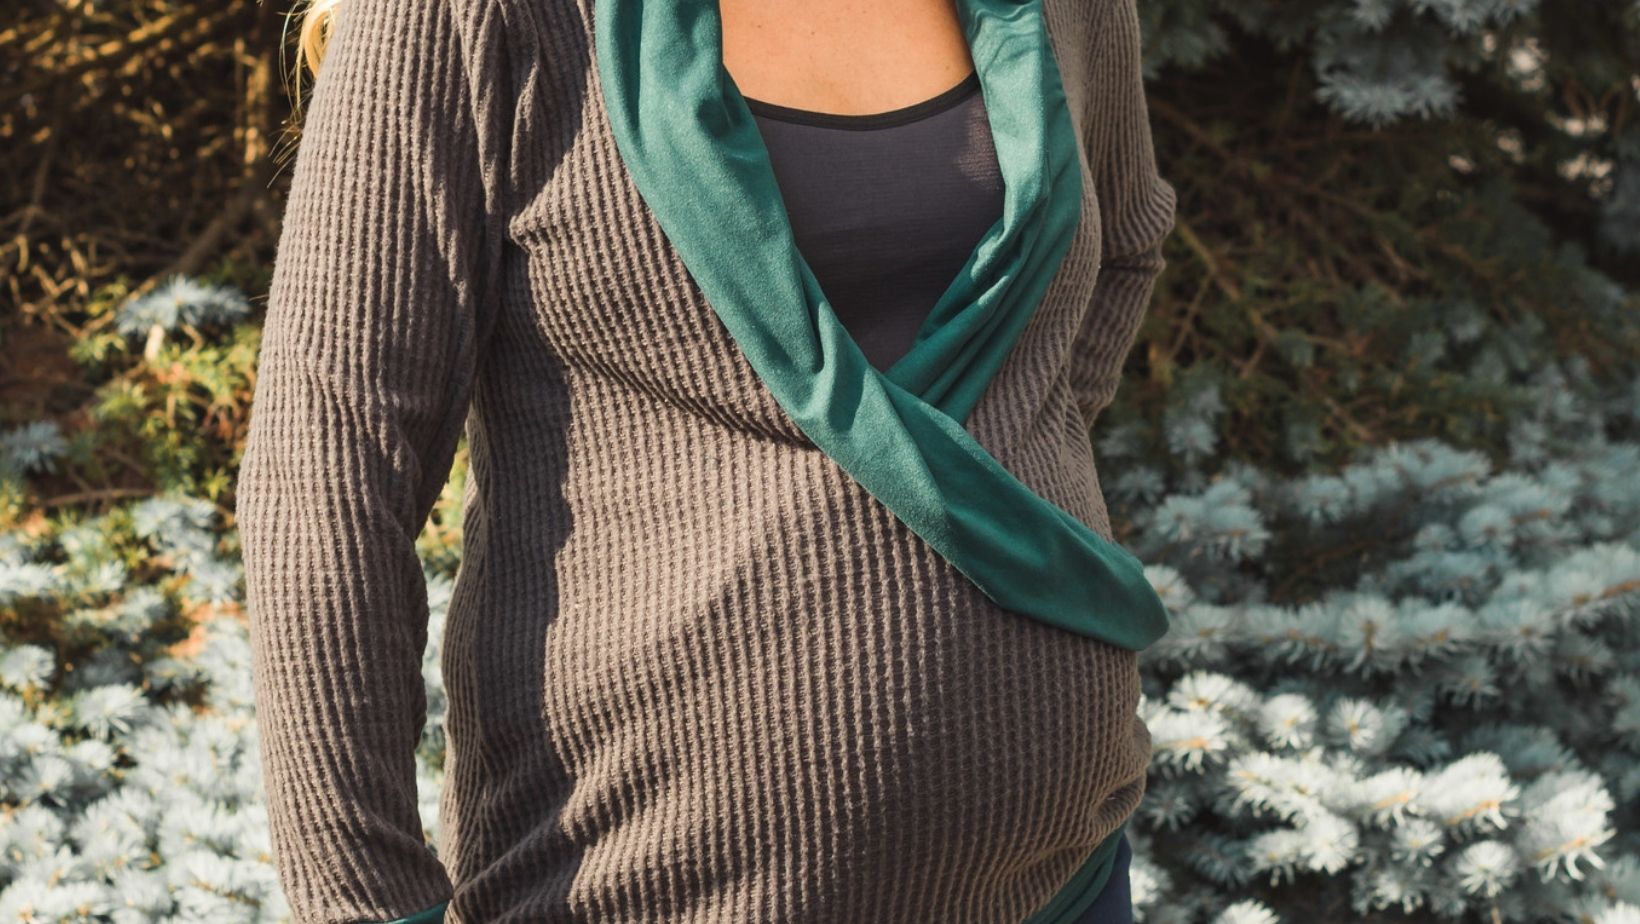 Shopping for Fall Basics - Maternity and Postpartum Style